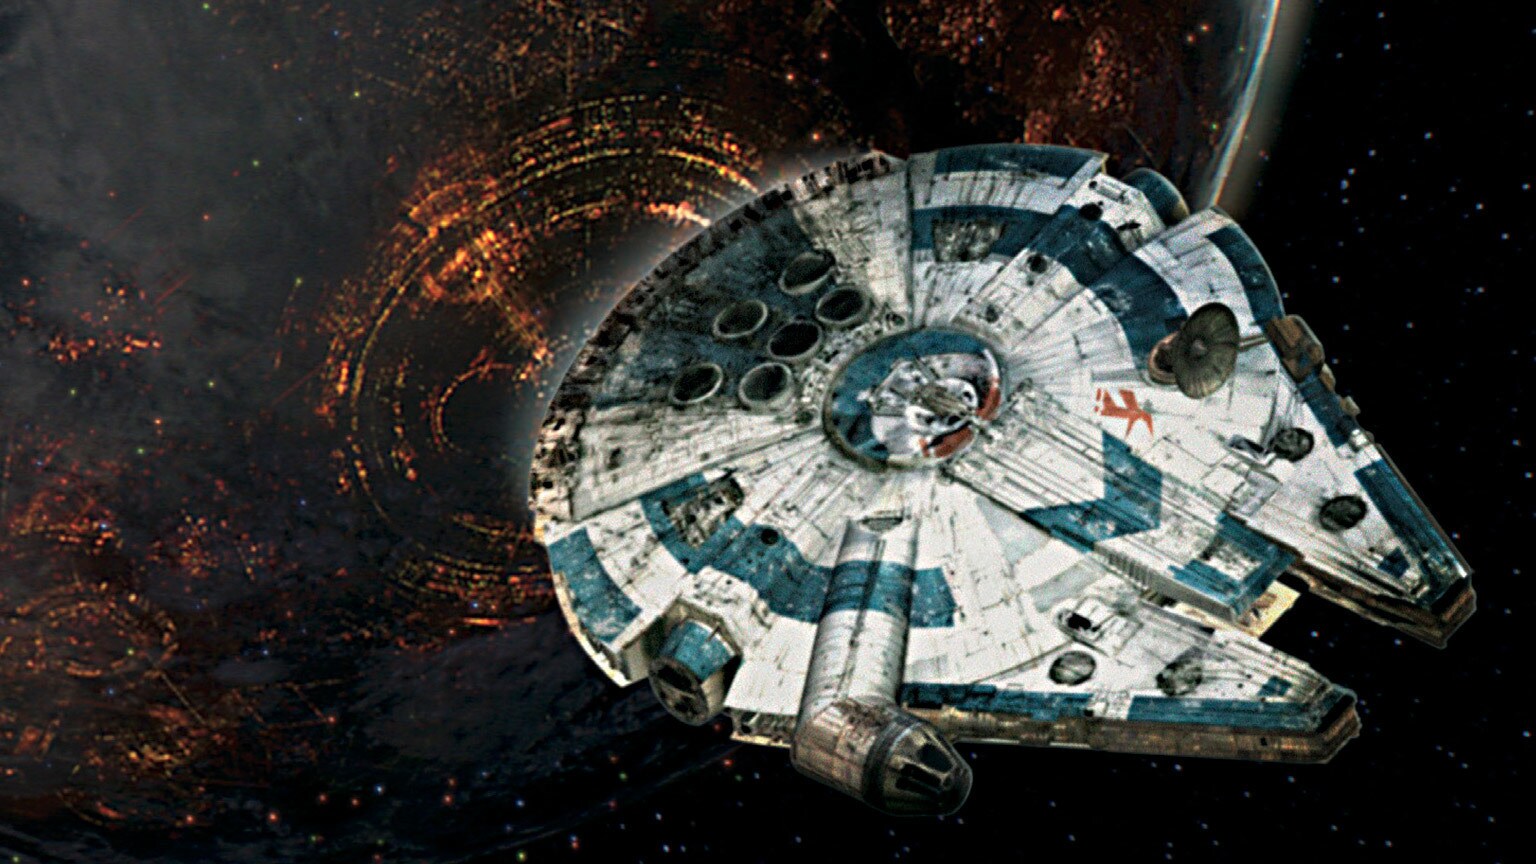 Everything You Need to Know to Fly theMillennium Falcon